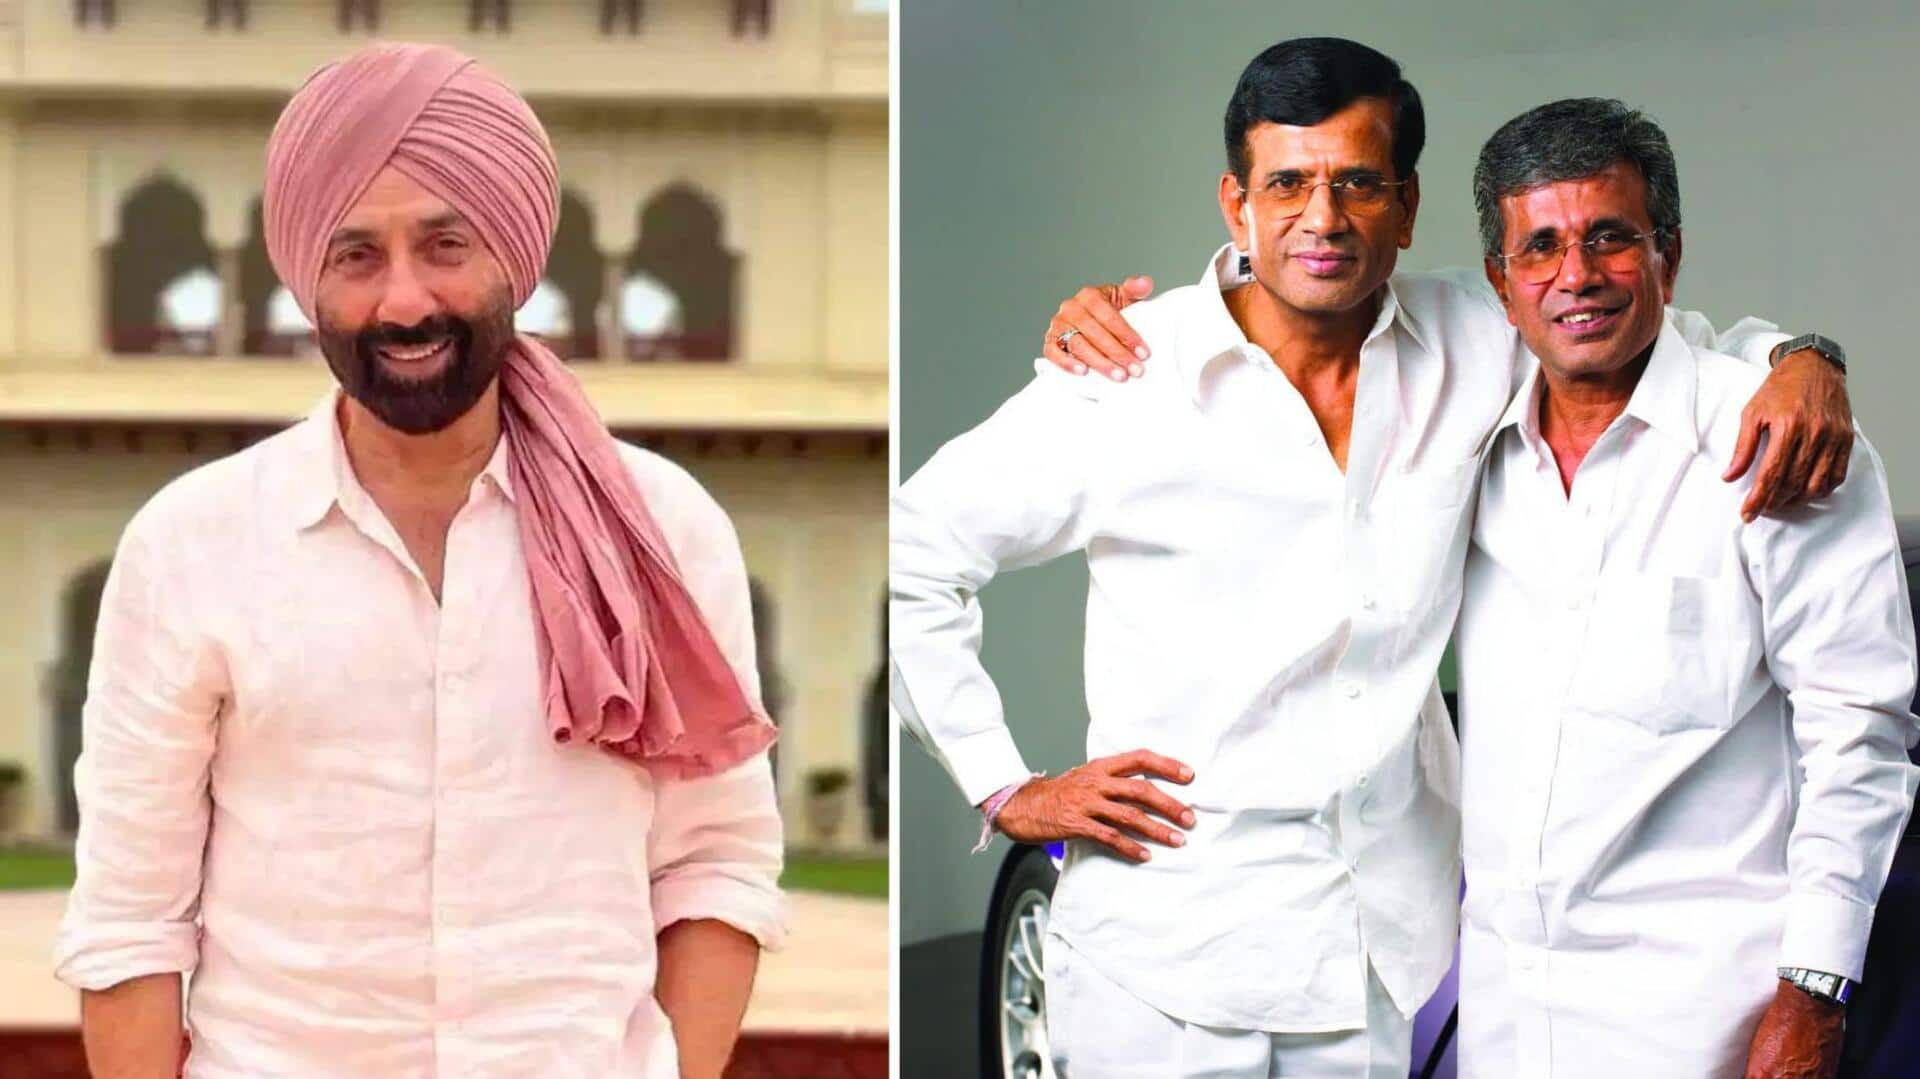 Sunny Deol, Abbas Mustan join forces for explosive action-thriller: Report